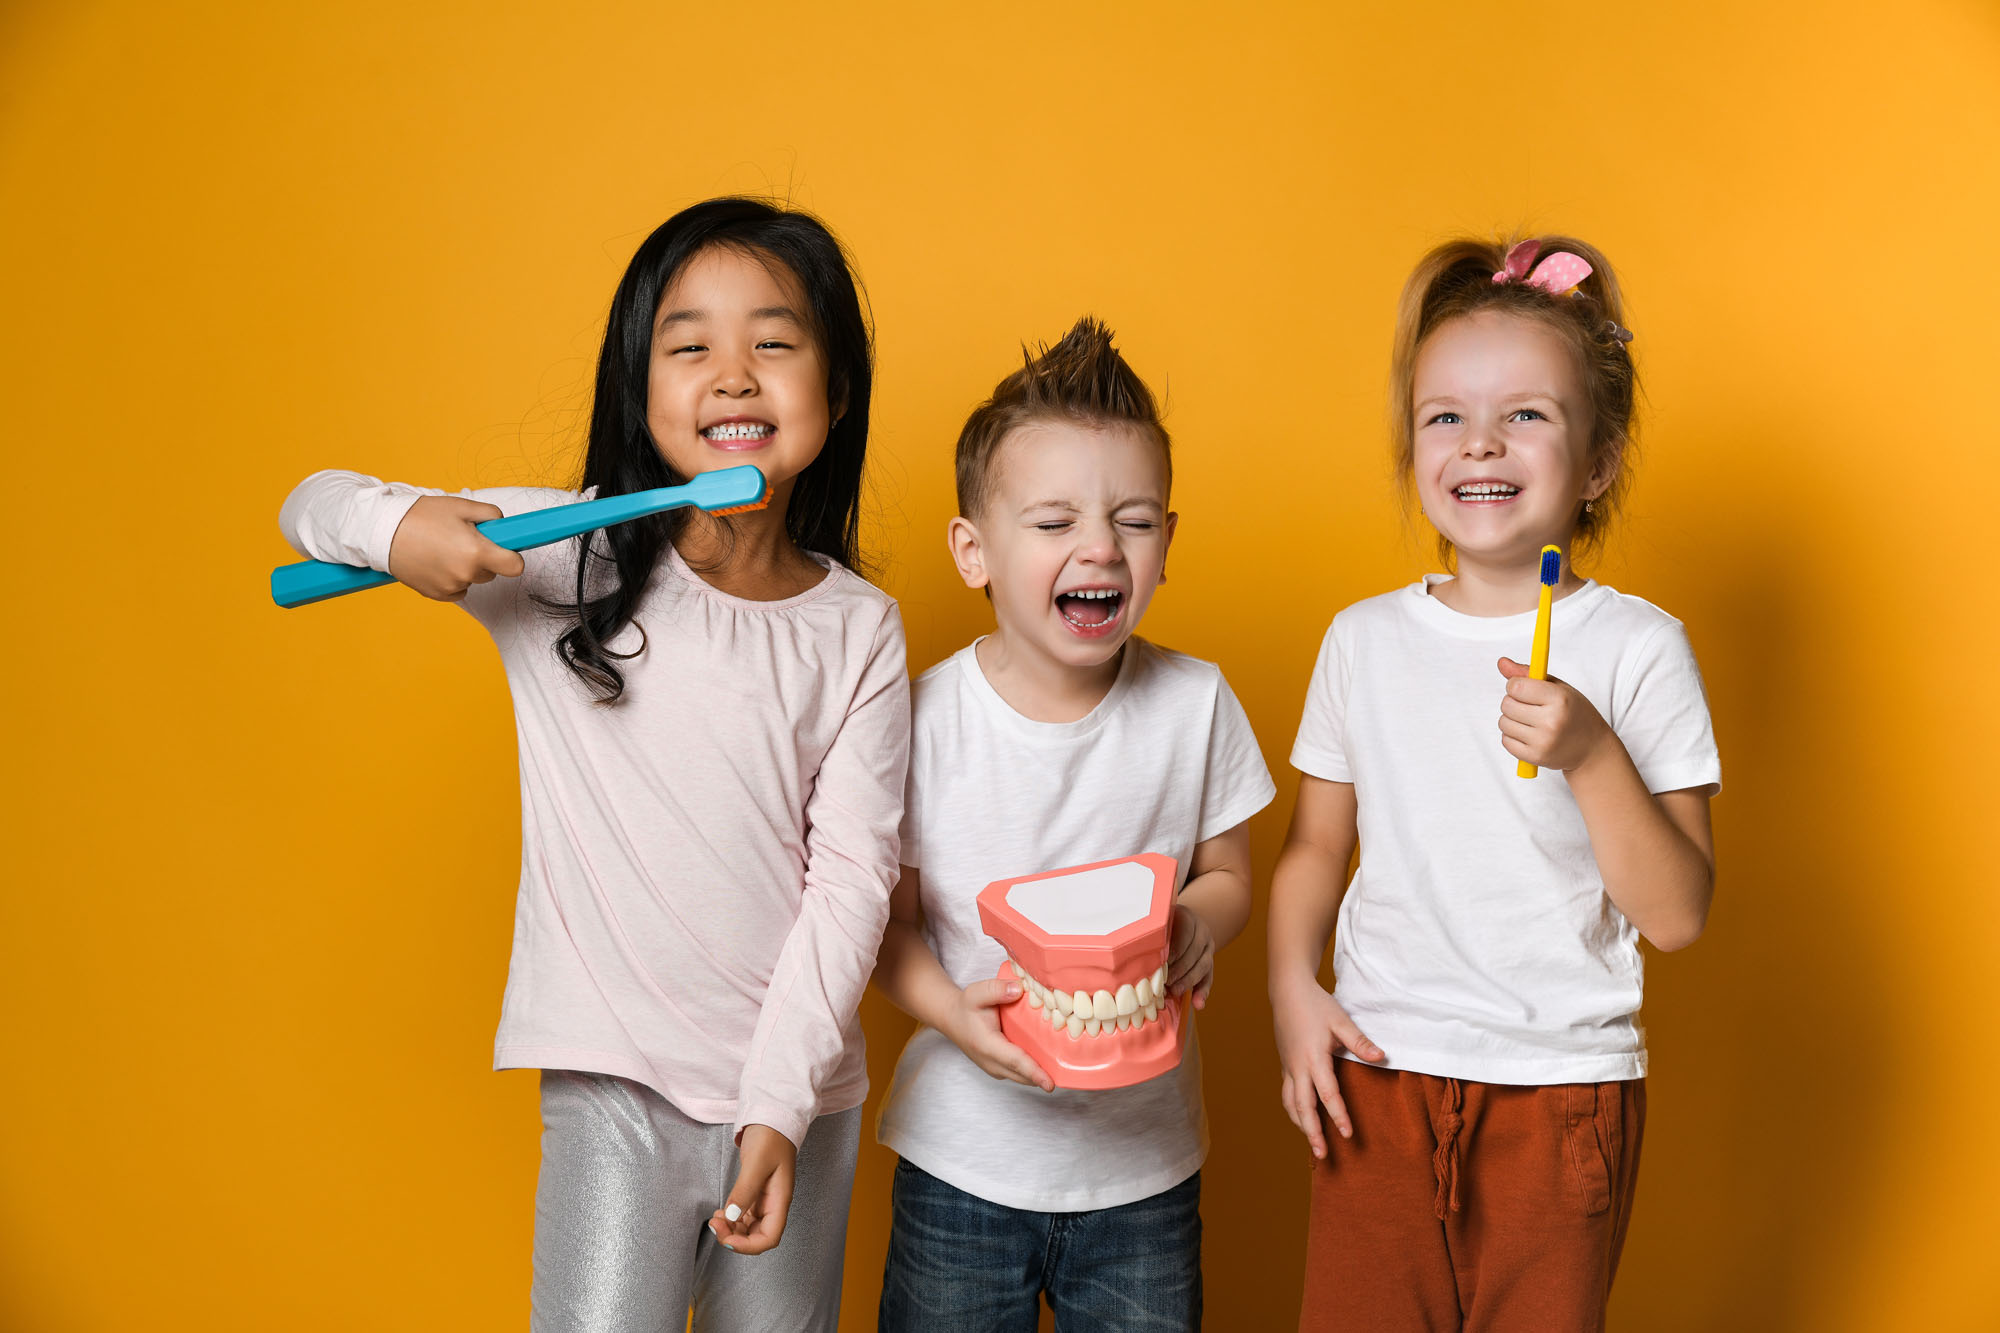 A comfortable and fun dental experience at Children's Dentistry of Elko